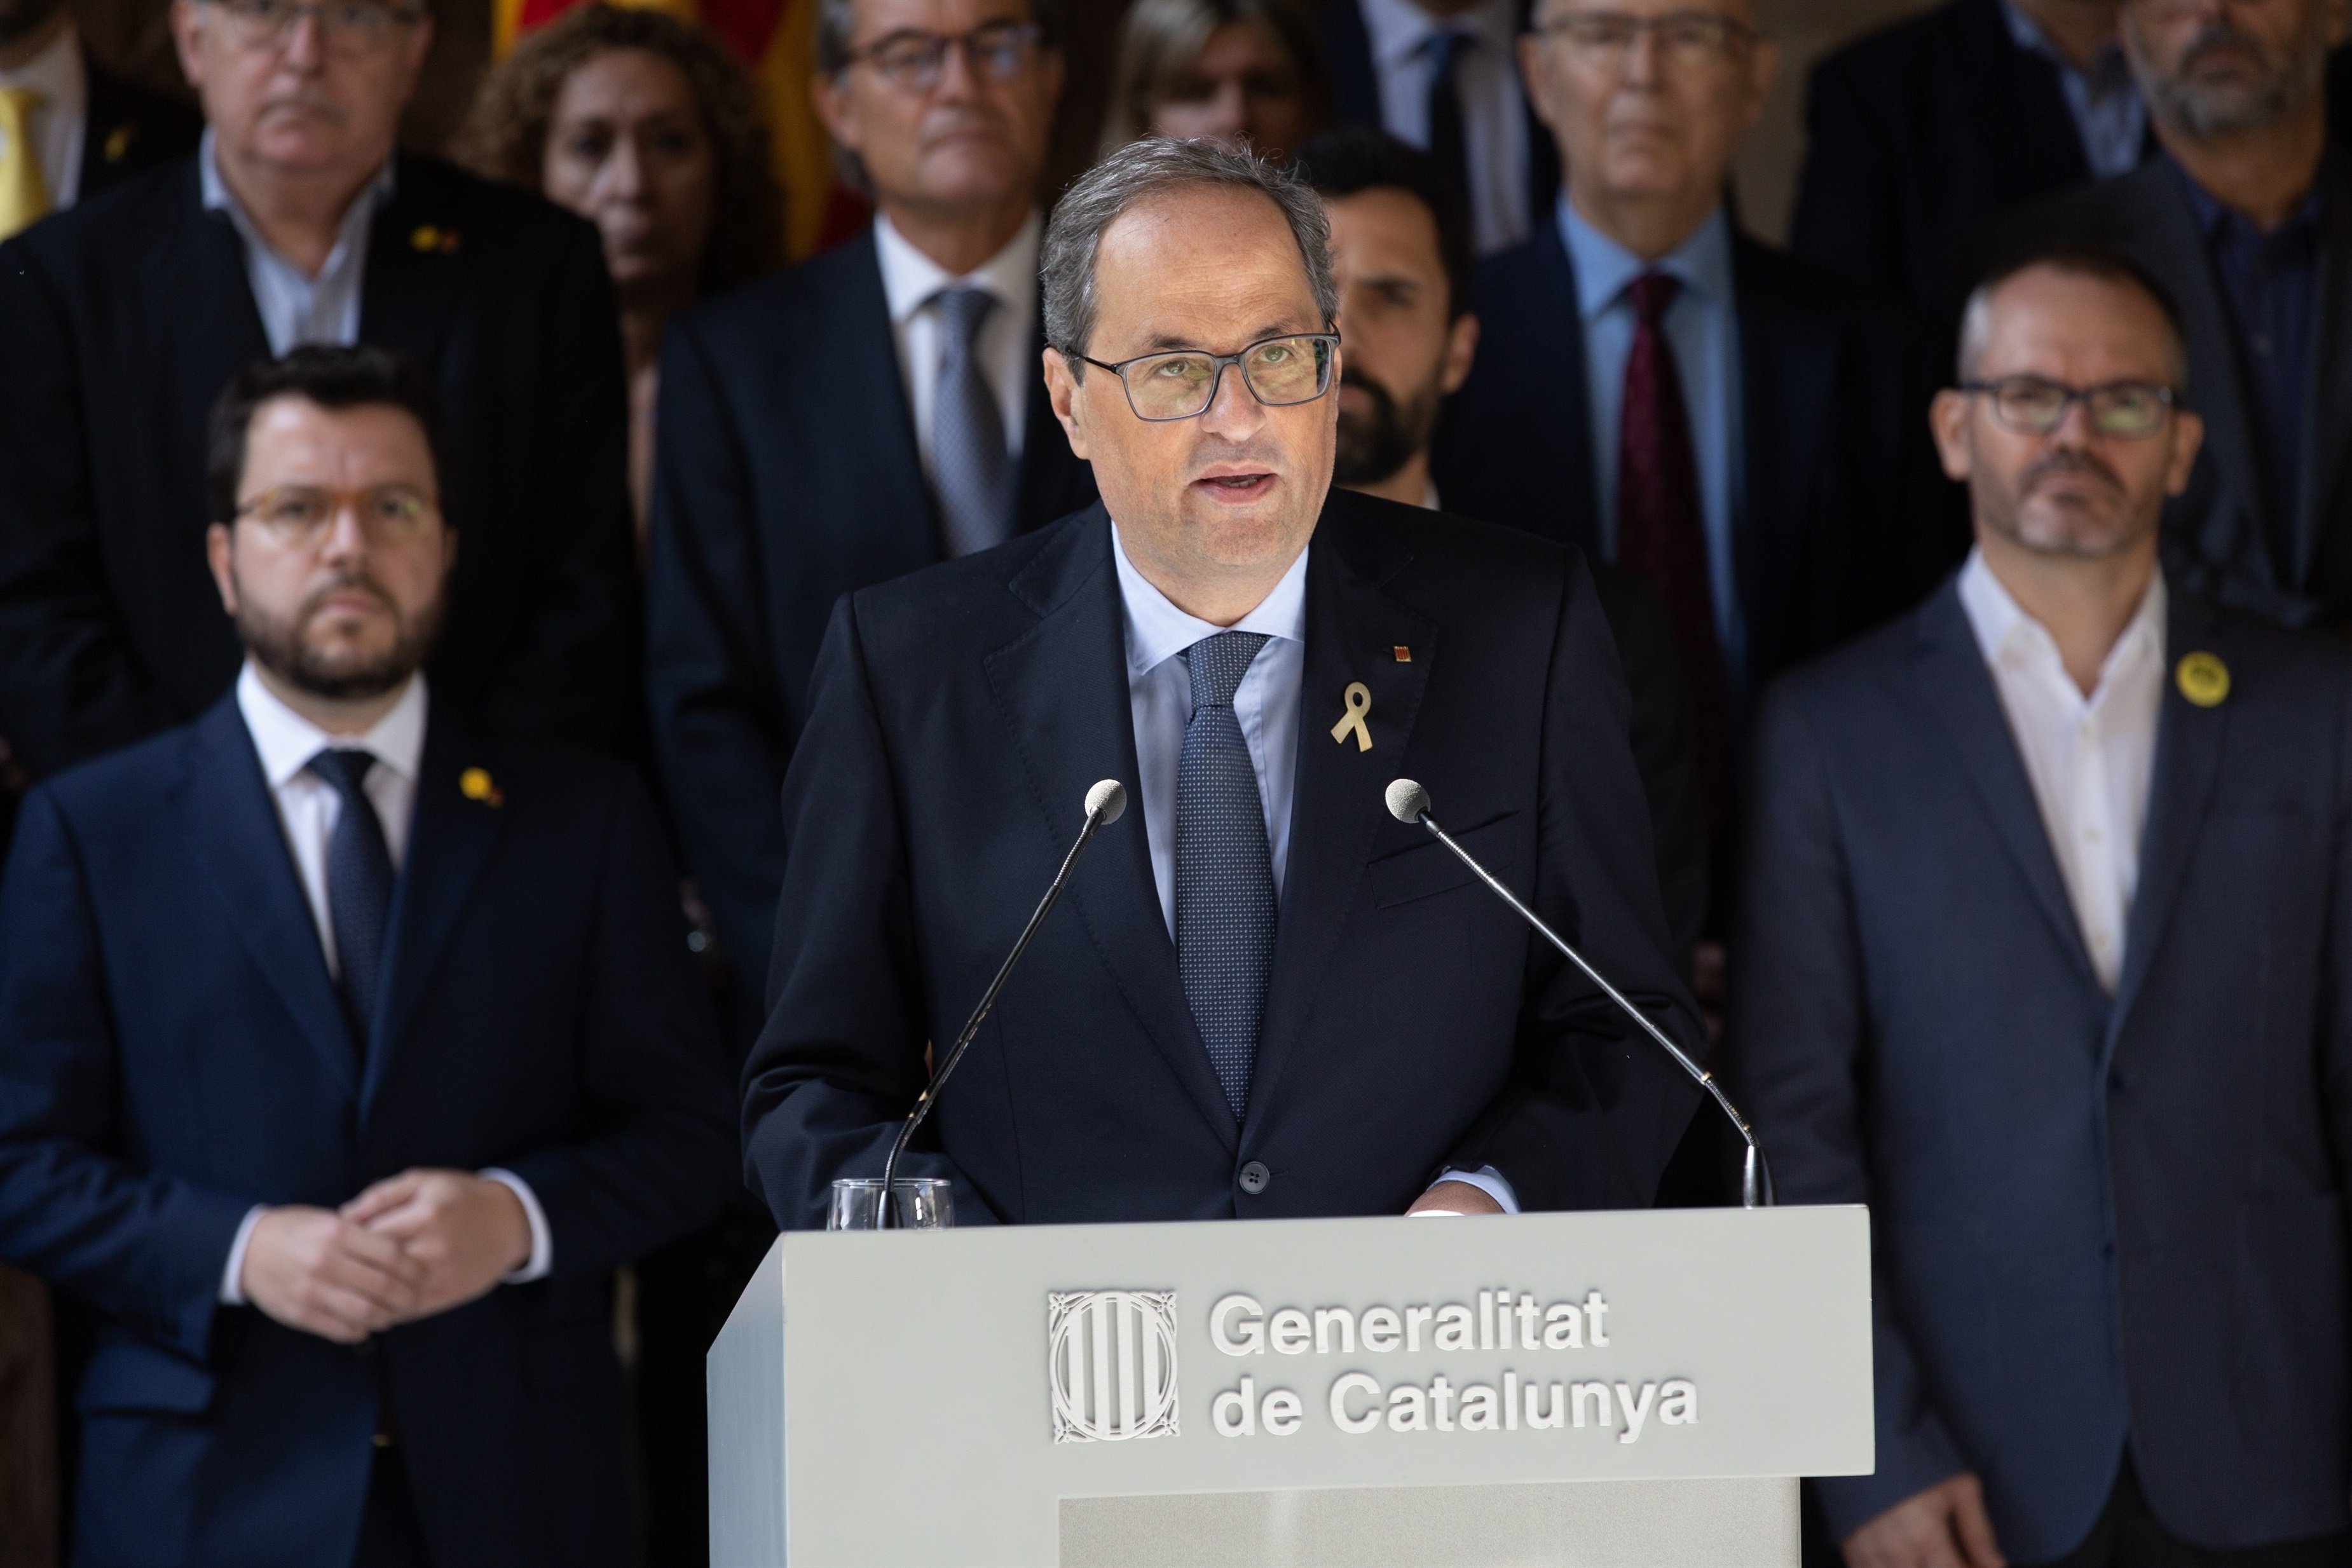 Torra calls for urgent meetings with Spanish king and acting PM Sánchez